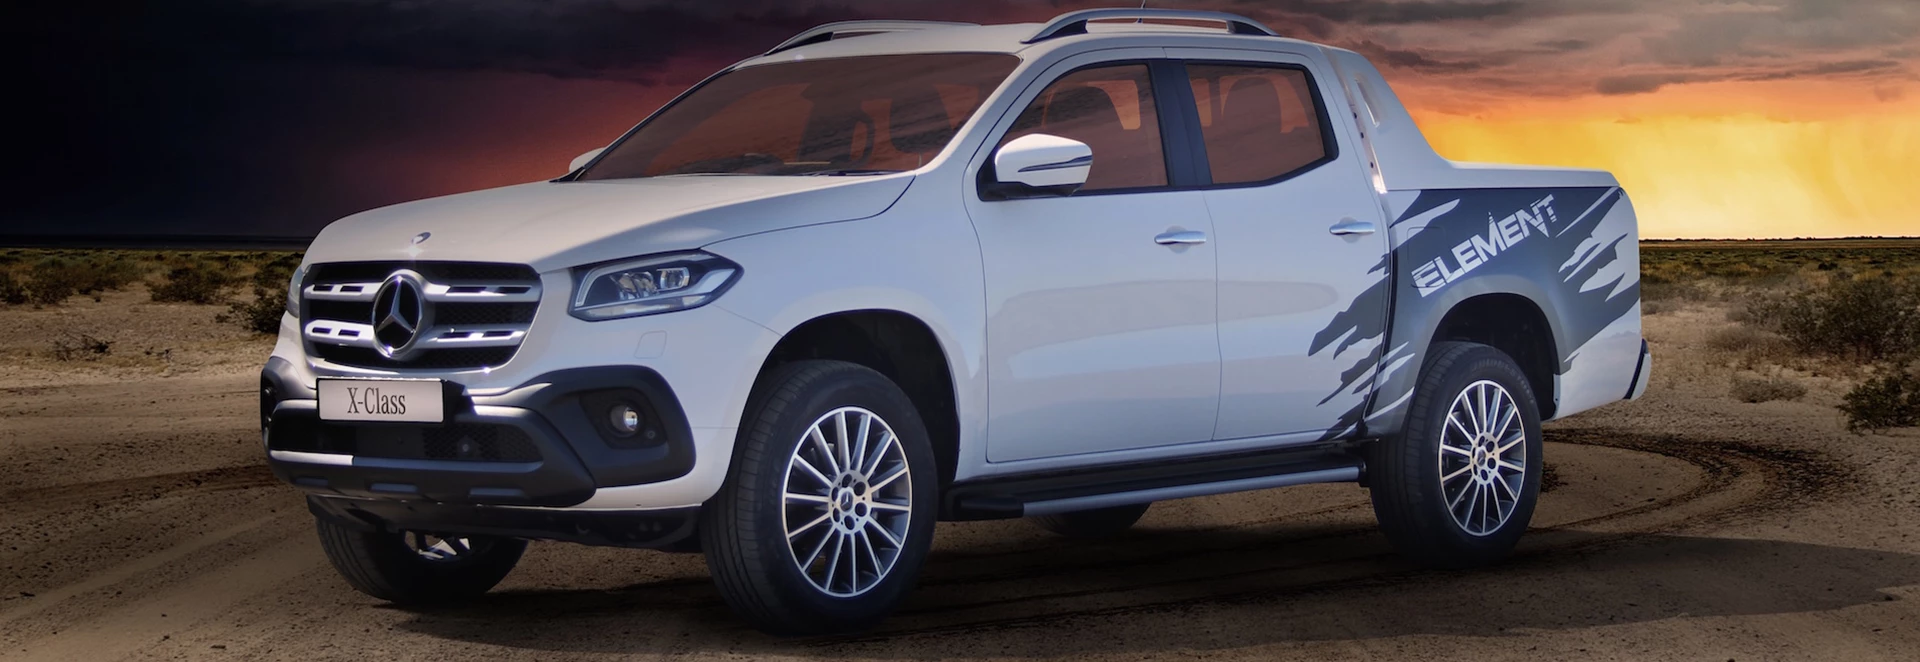 Mercedes-Benz adds new Element Edition to X-Class pick-up line-up 